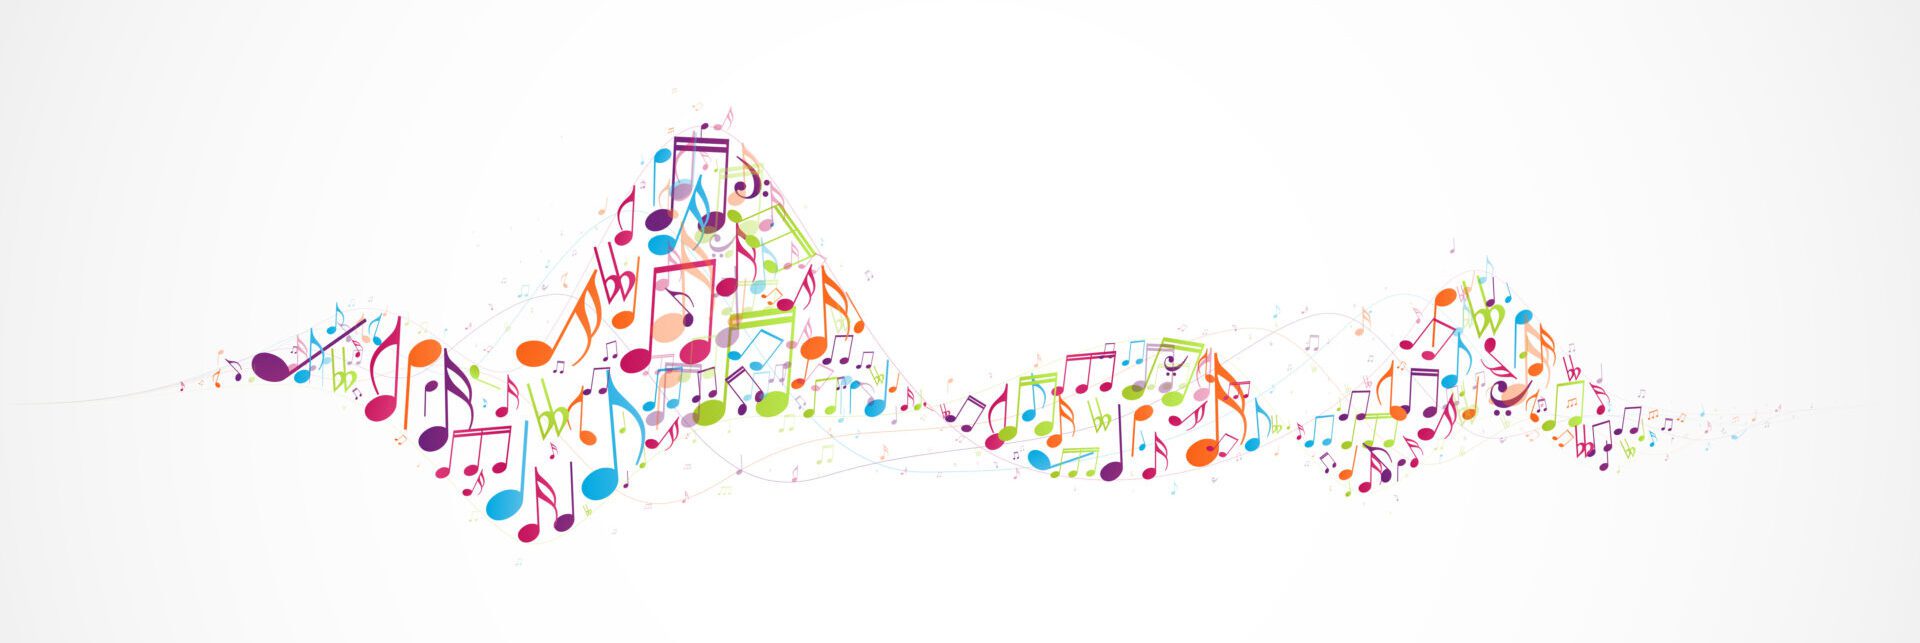 A white background with colorful musical notes on it.